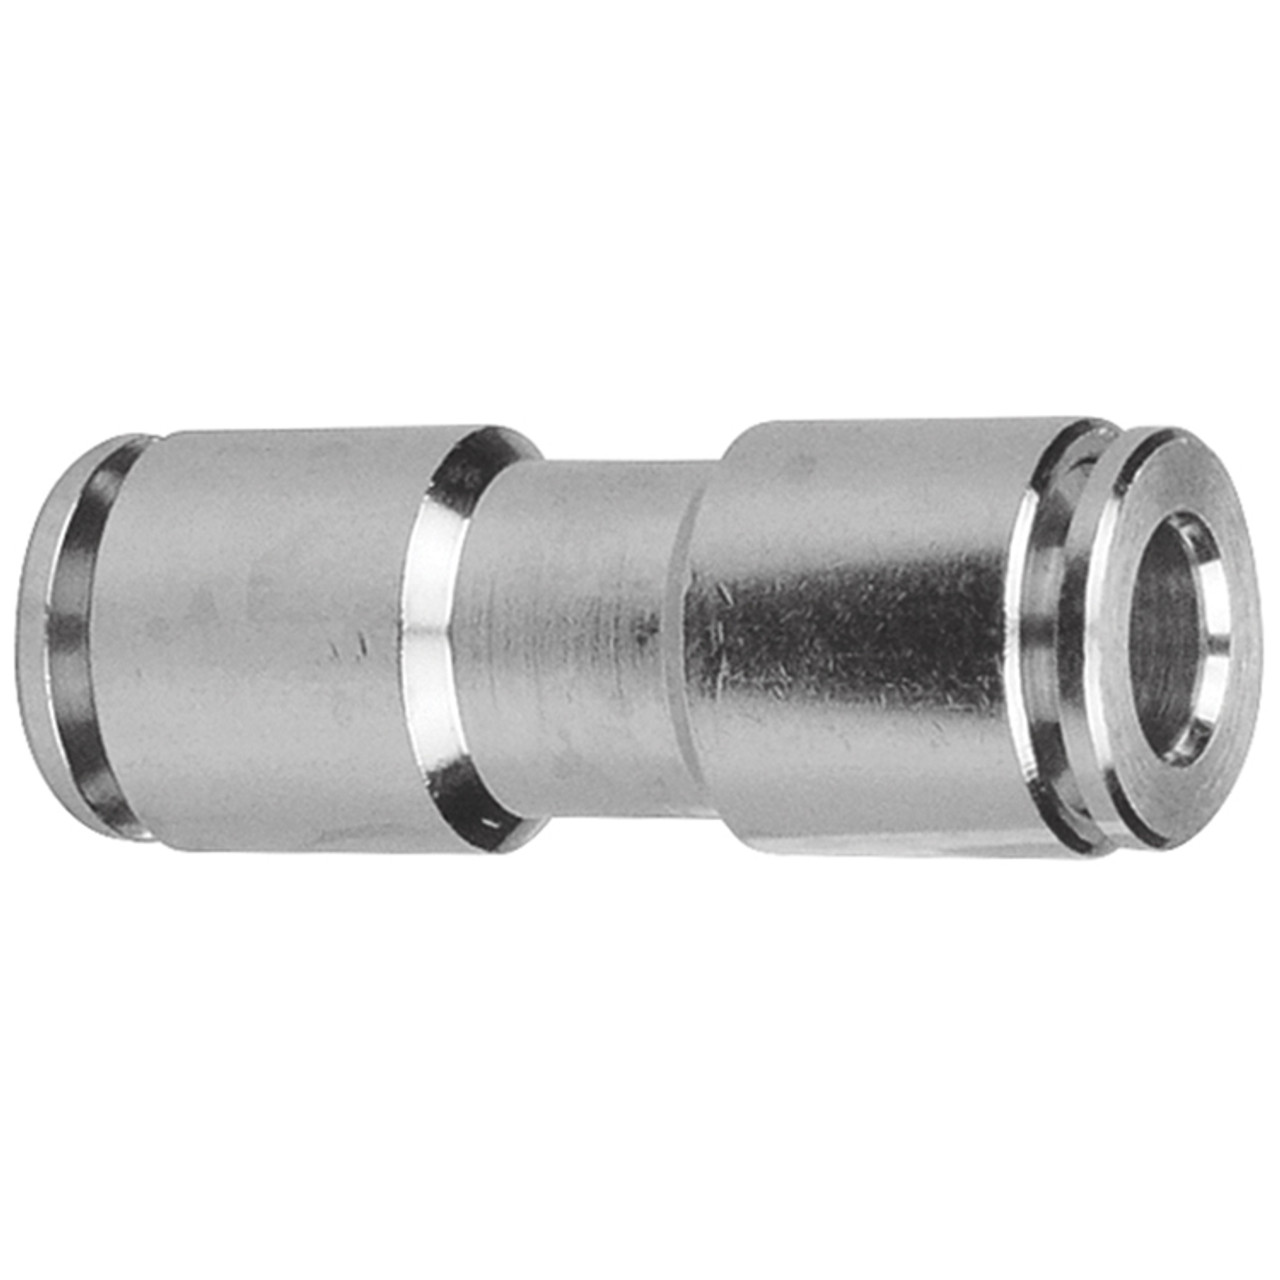 10mm Nickel Plated Brass Push-To-Connect Union   G6060PM-10M-10M